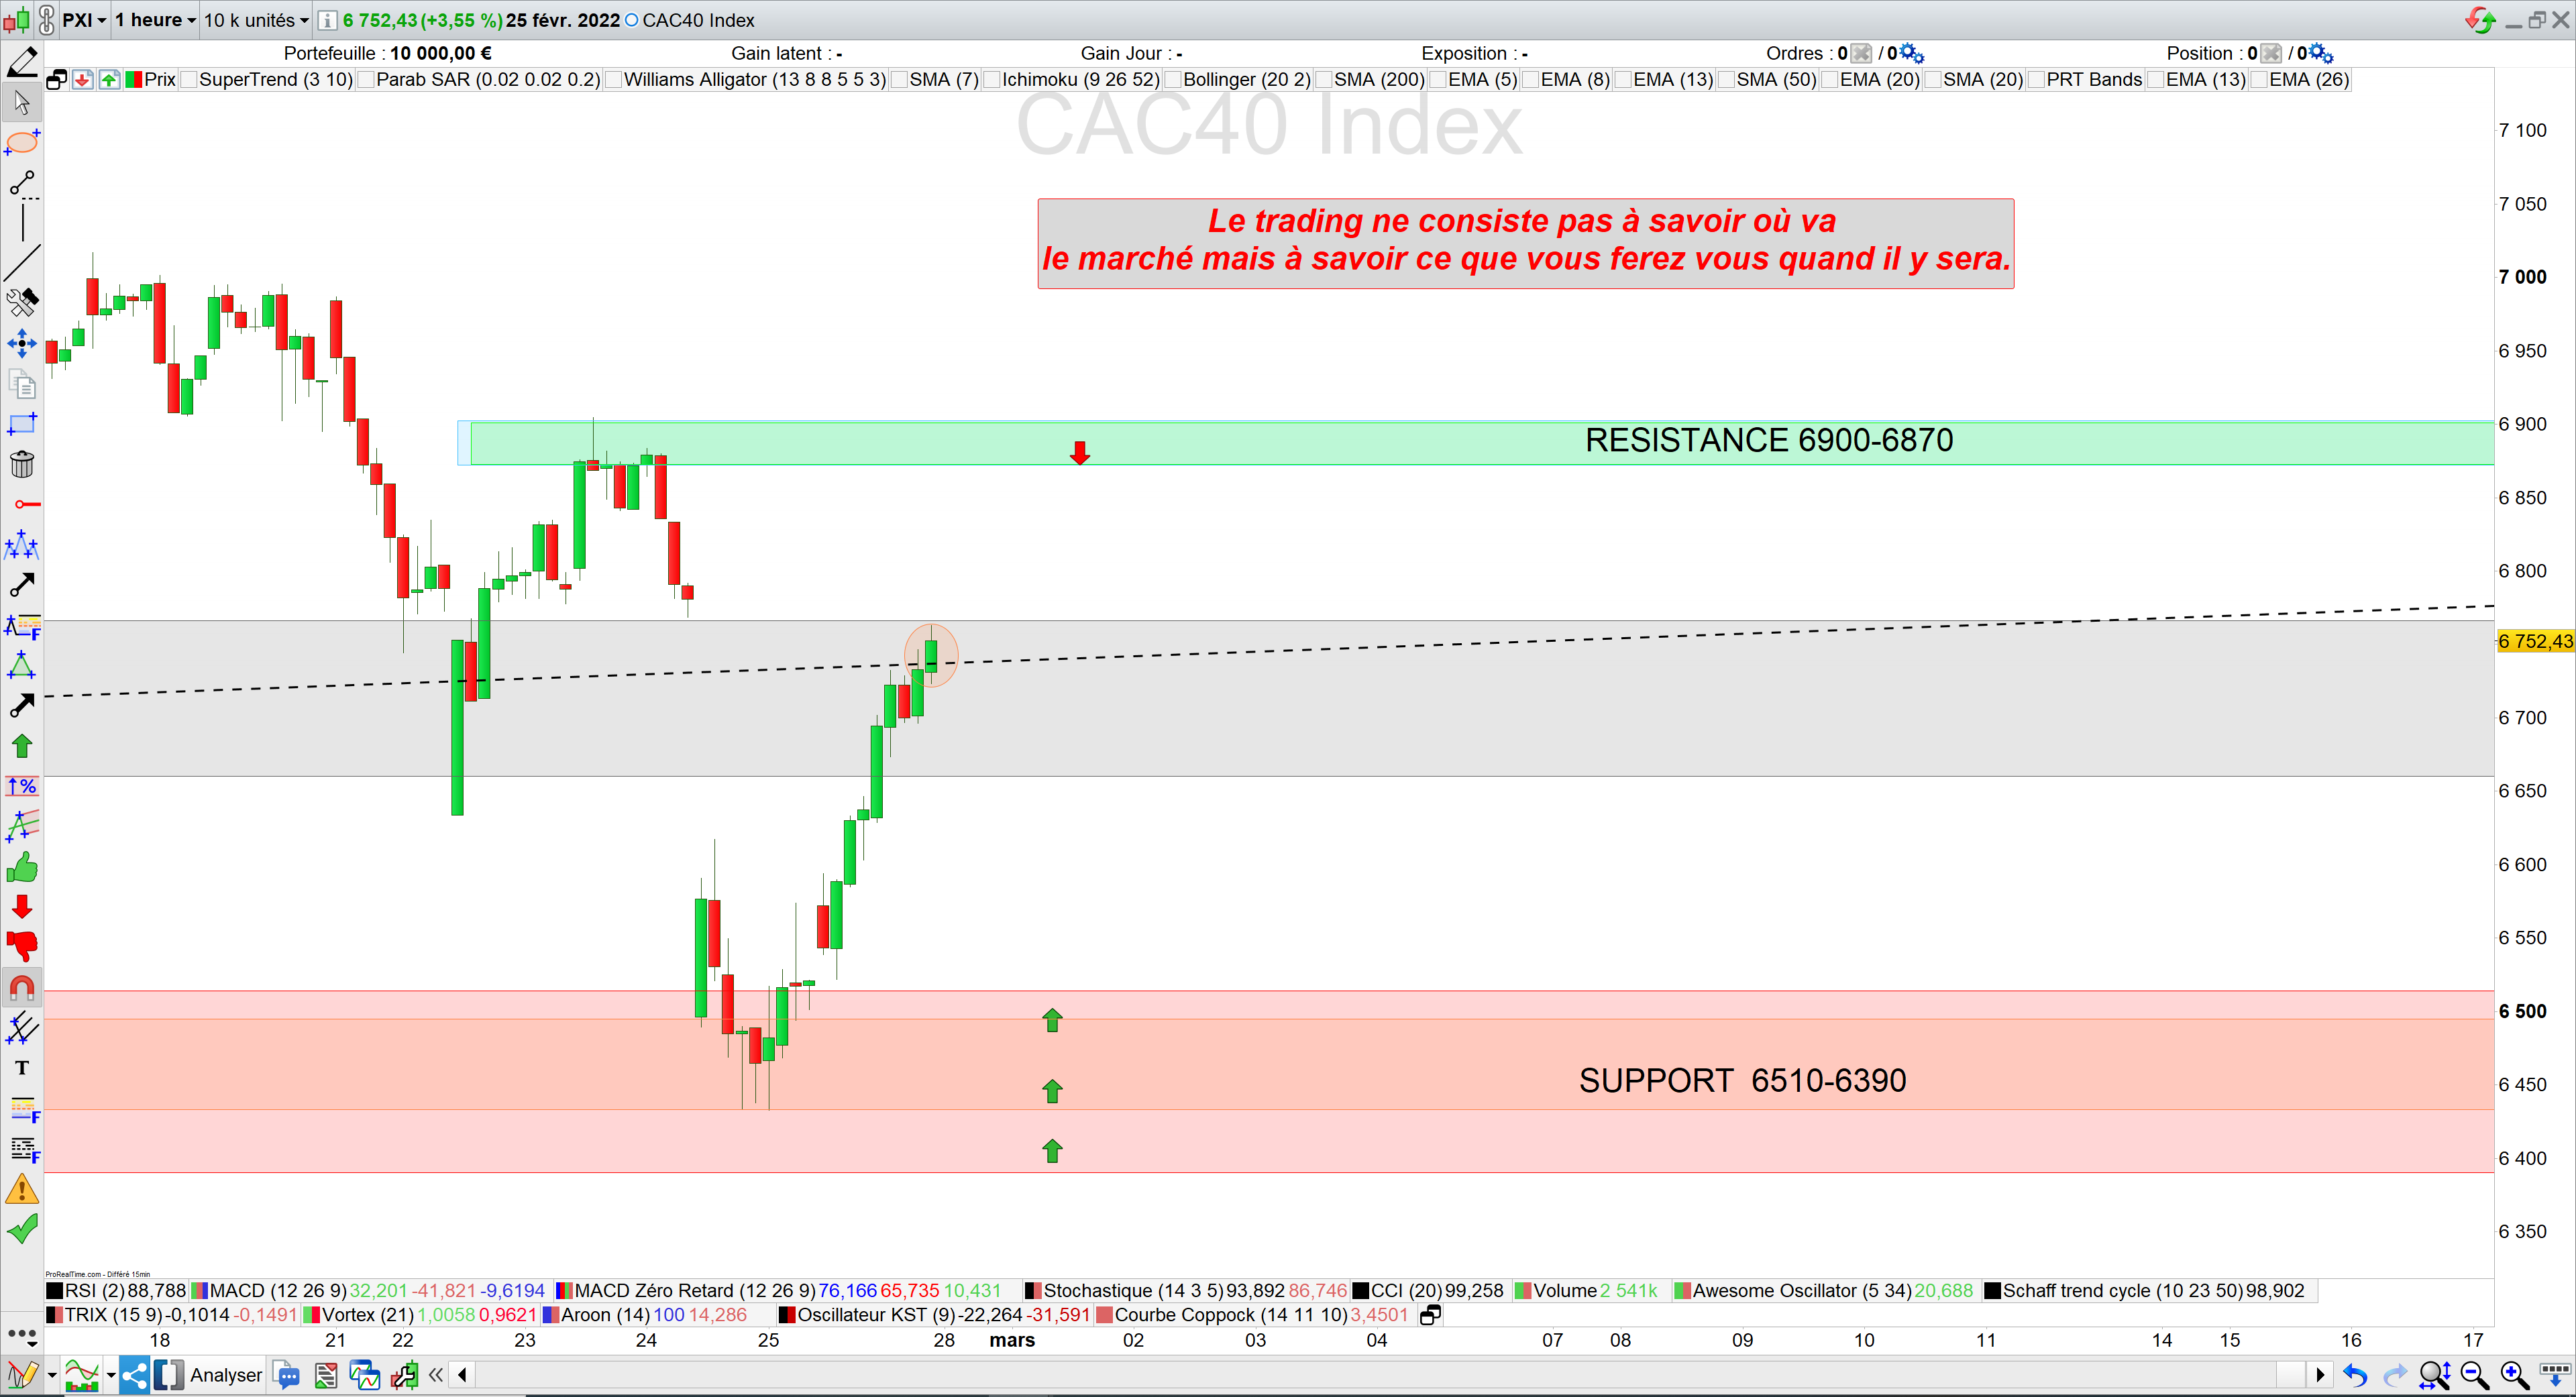 Trading cac40 28/02/22